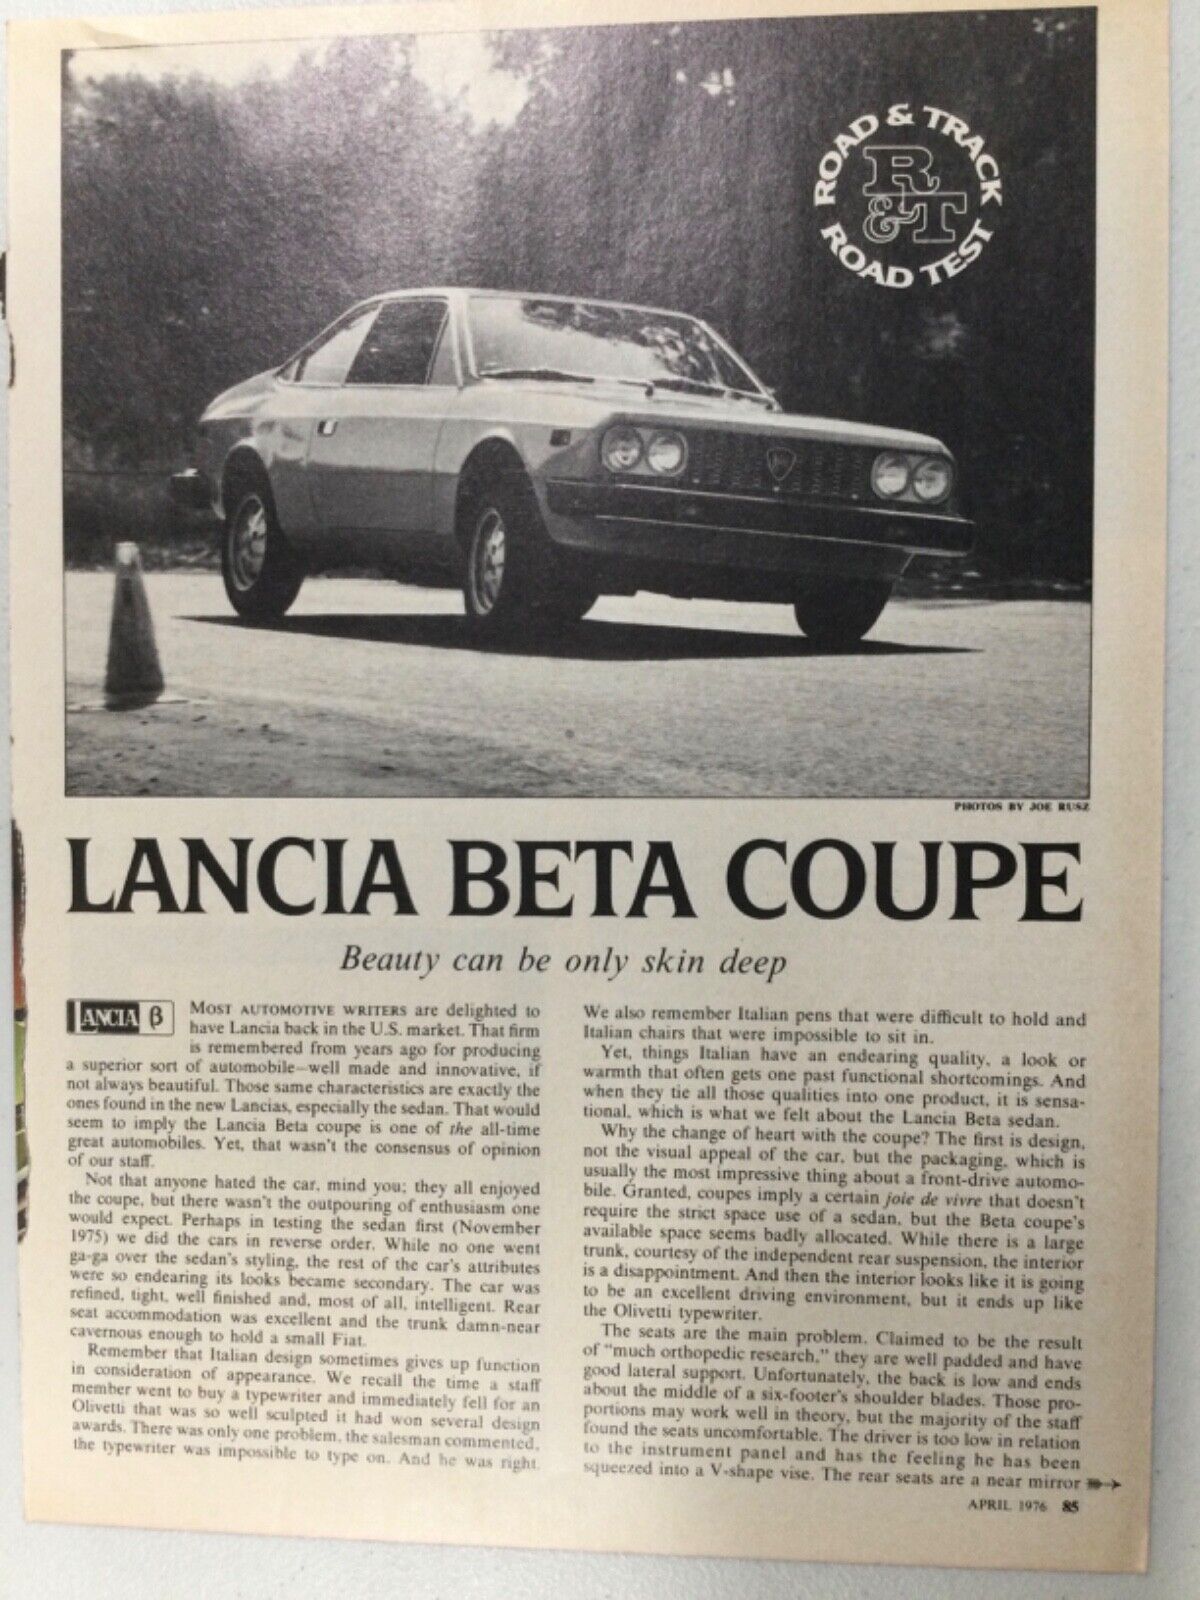 LLLArt69 Vintage Article Road Test 1976 Lancia Beta Coupe April 1976 2 page